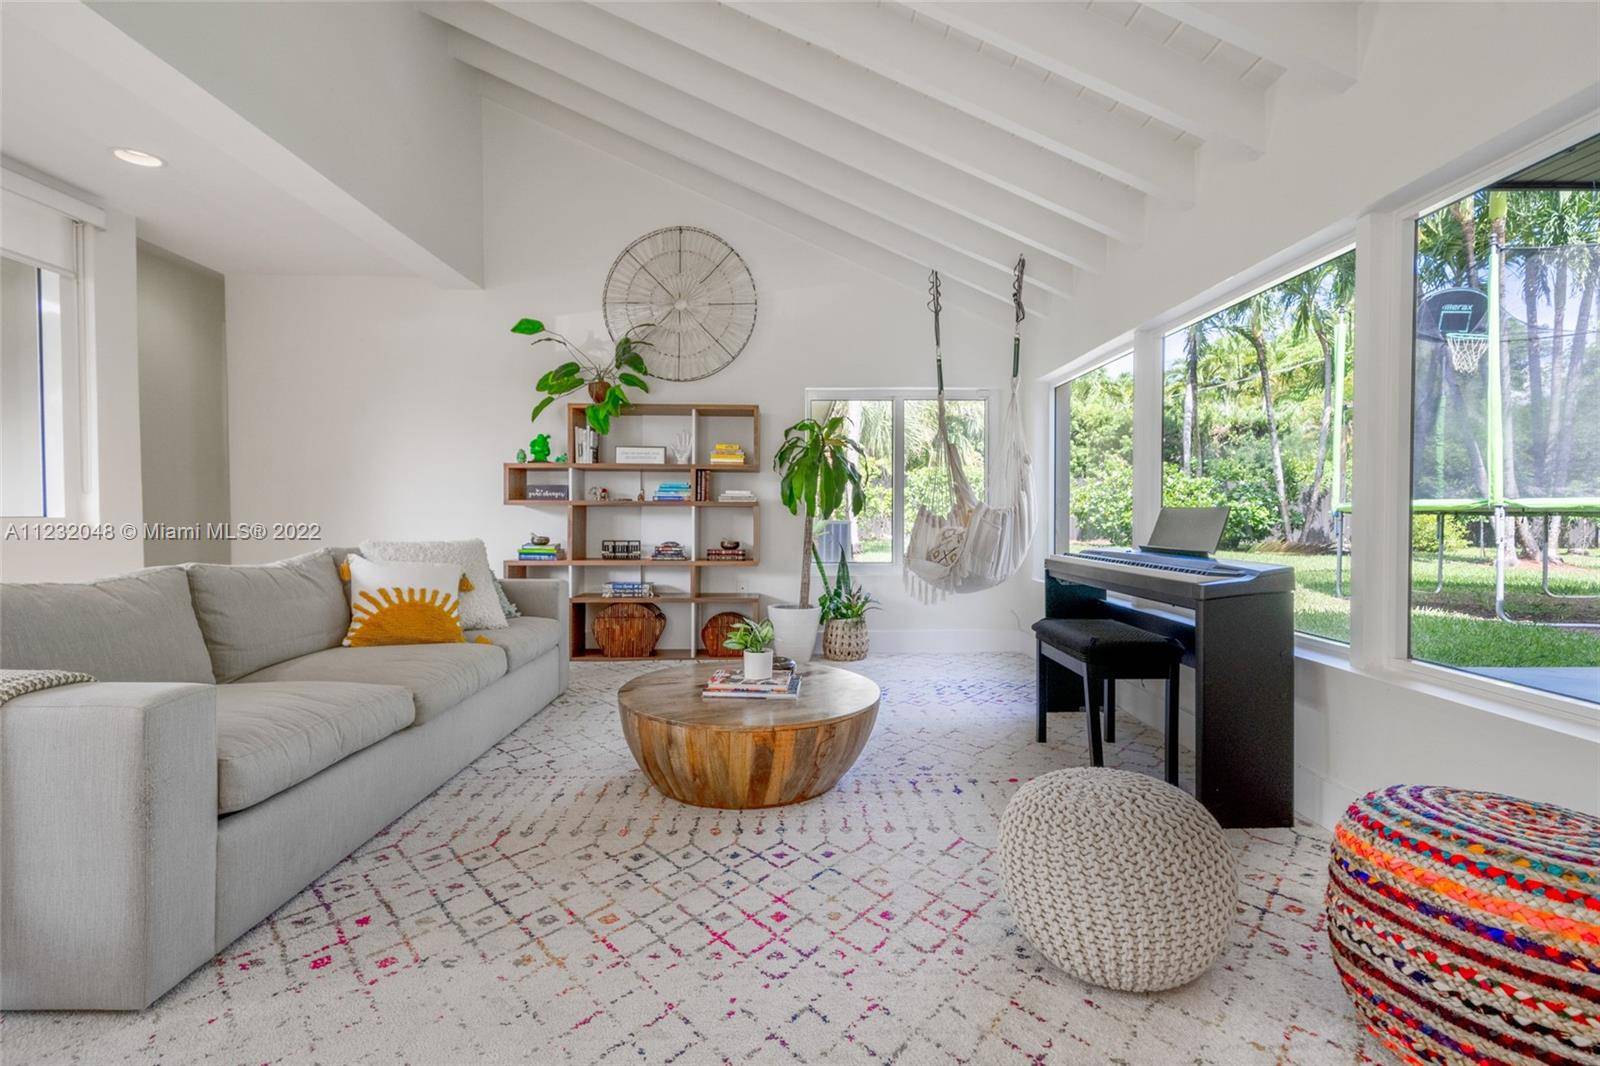 Welcome to Boho House ! This home was designed as a welcoming sanctuary space perfect for friends and family.